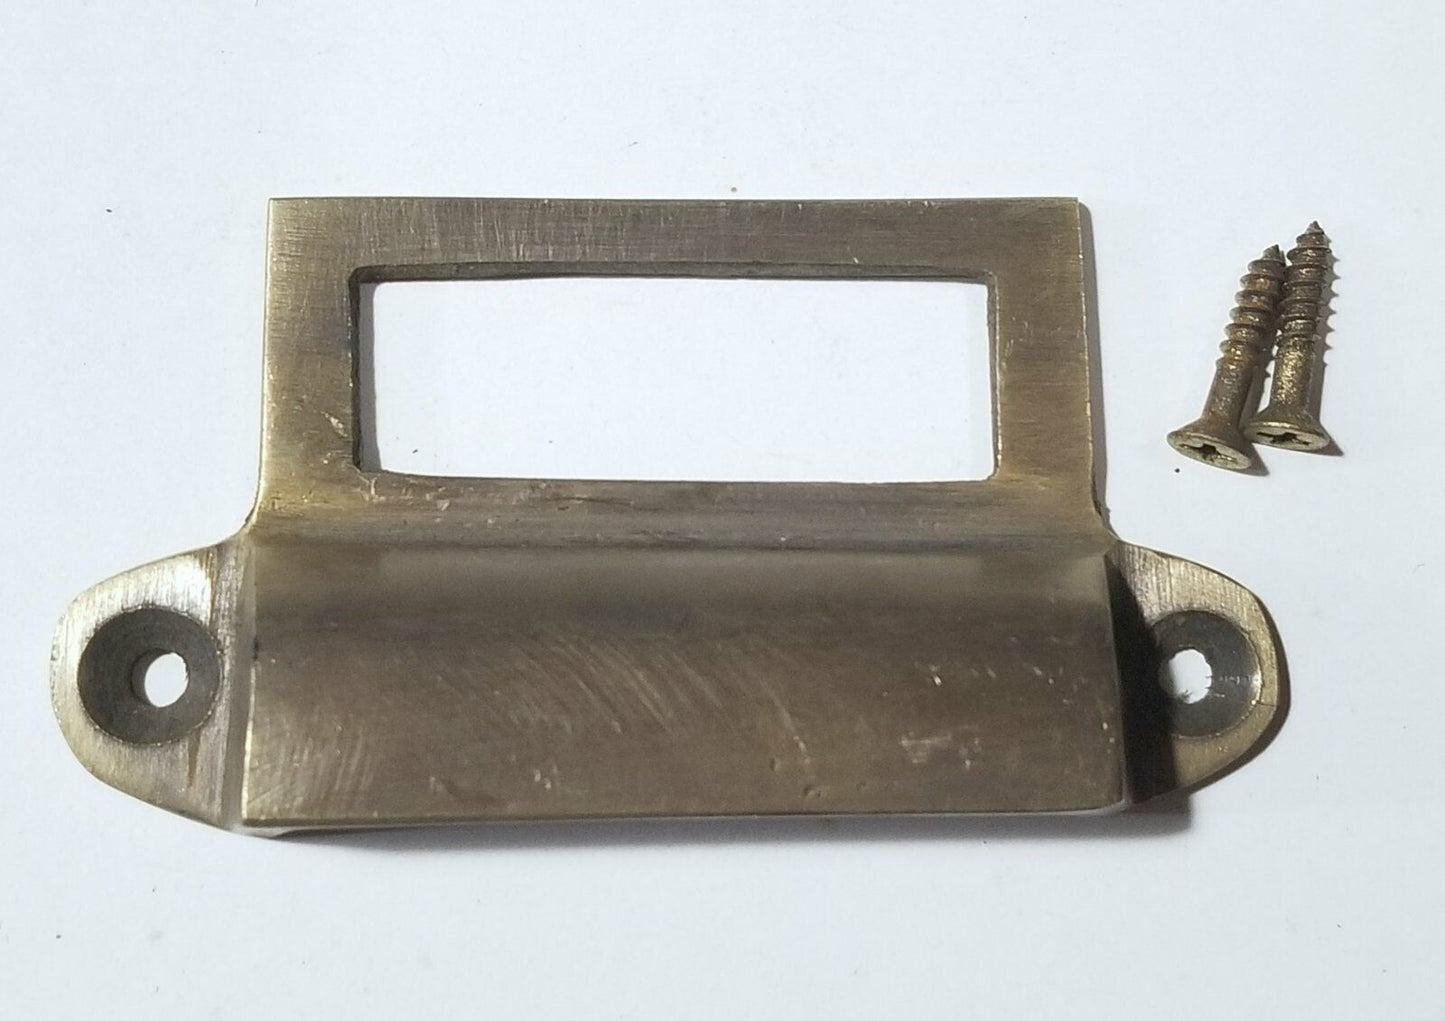 2 Antique Style Card File Cabinet Handle, File Label Holders with Cup Pull #A17